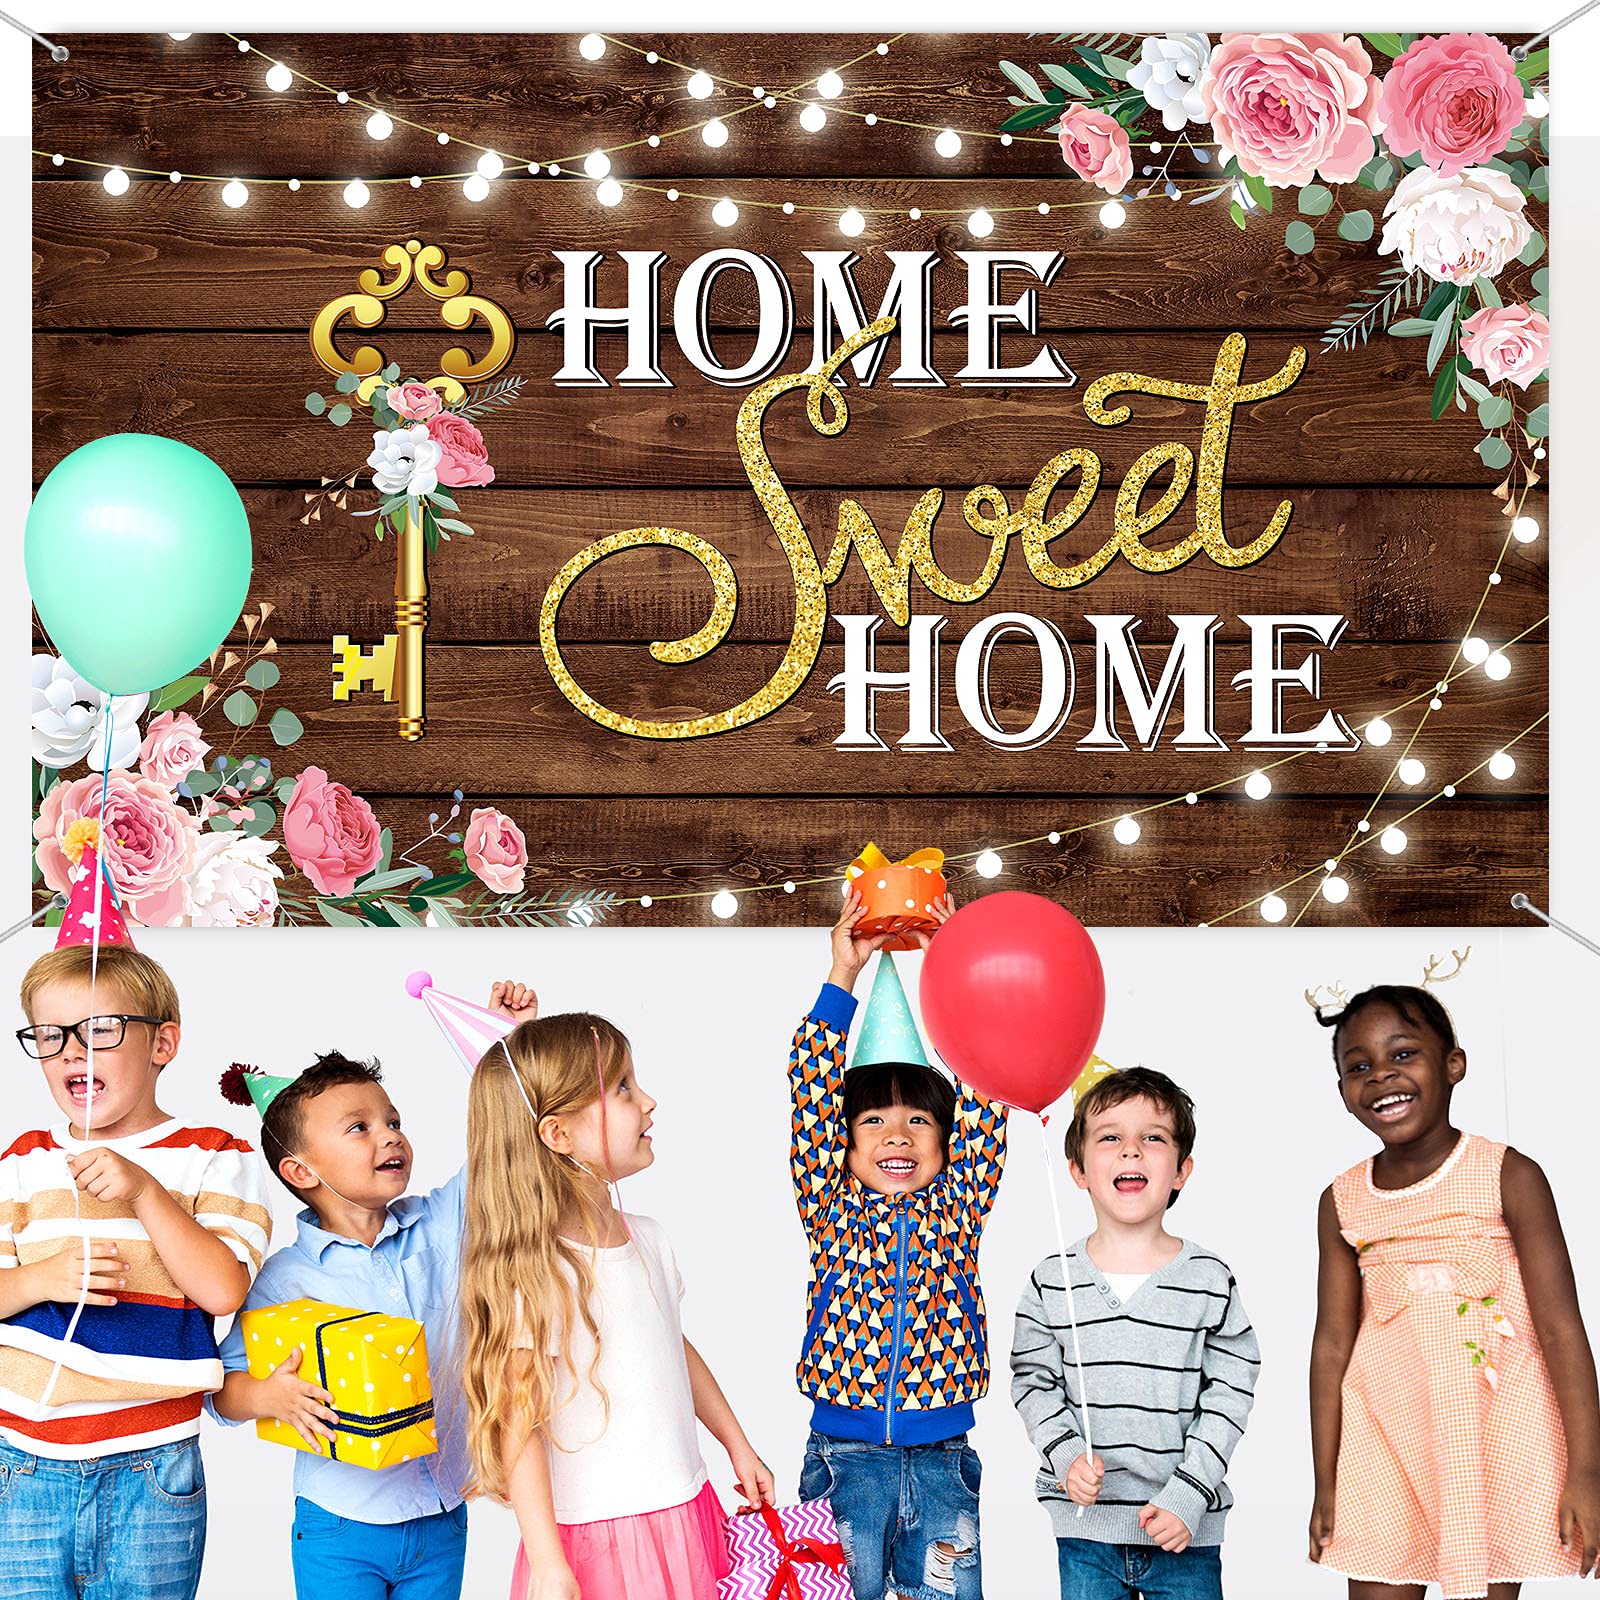 House Warming party Decoration Home Sweet Home banner Backdrop Photography Key Shining Lights Background Pink Floral Wooden Floor Wedding Photo Booth Props 70.8x43.3inches